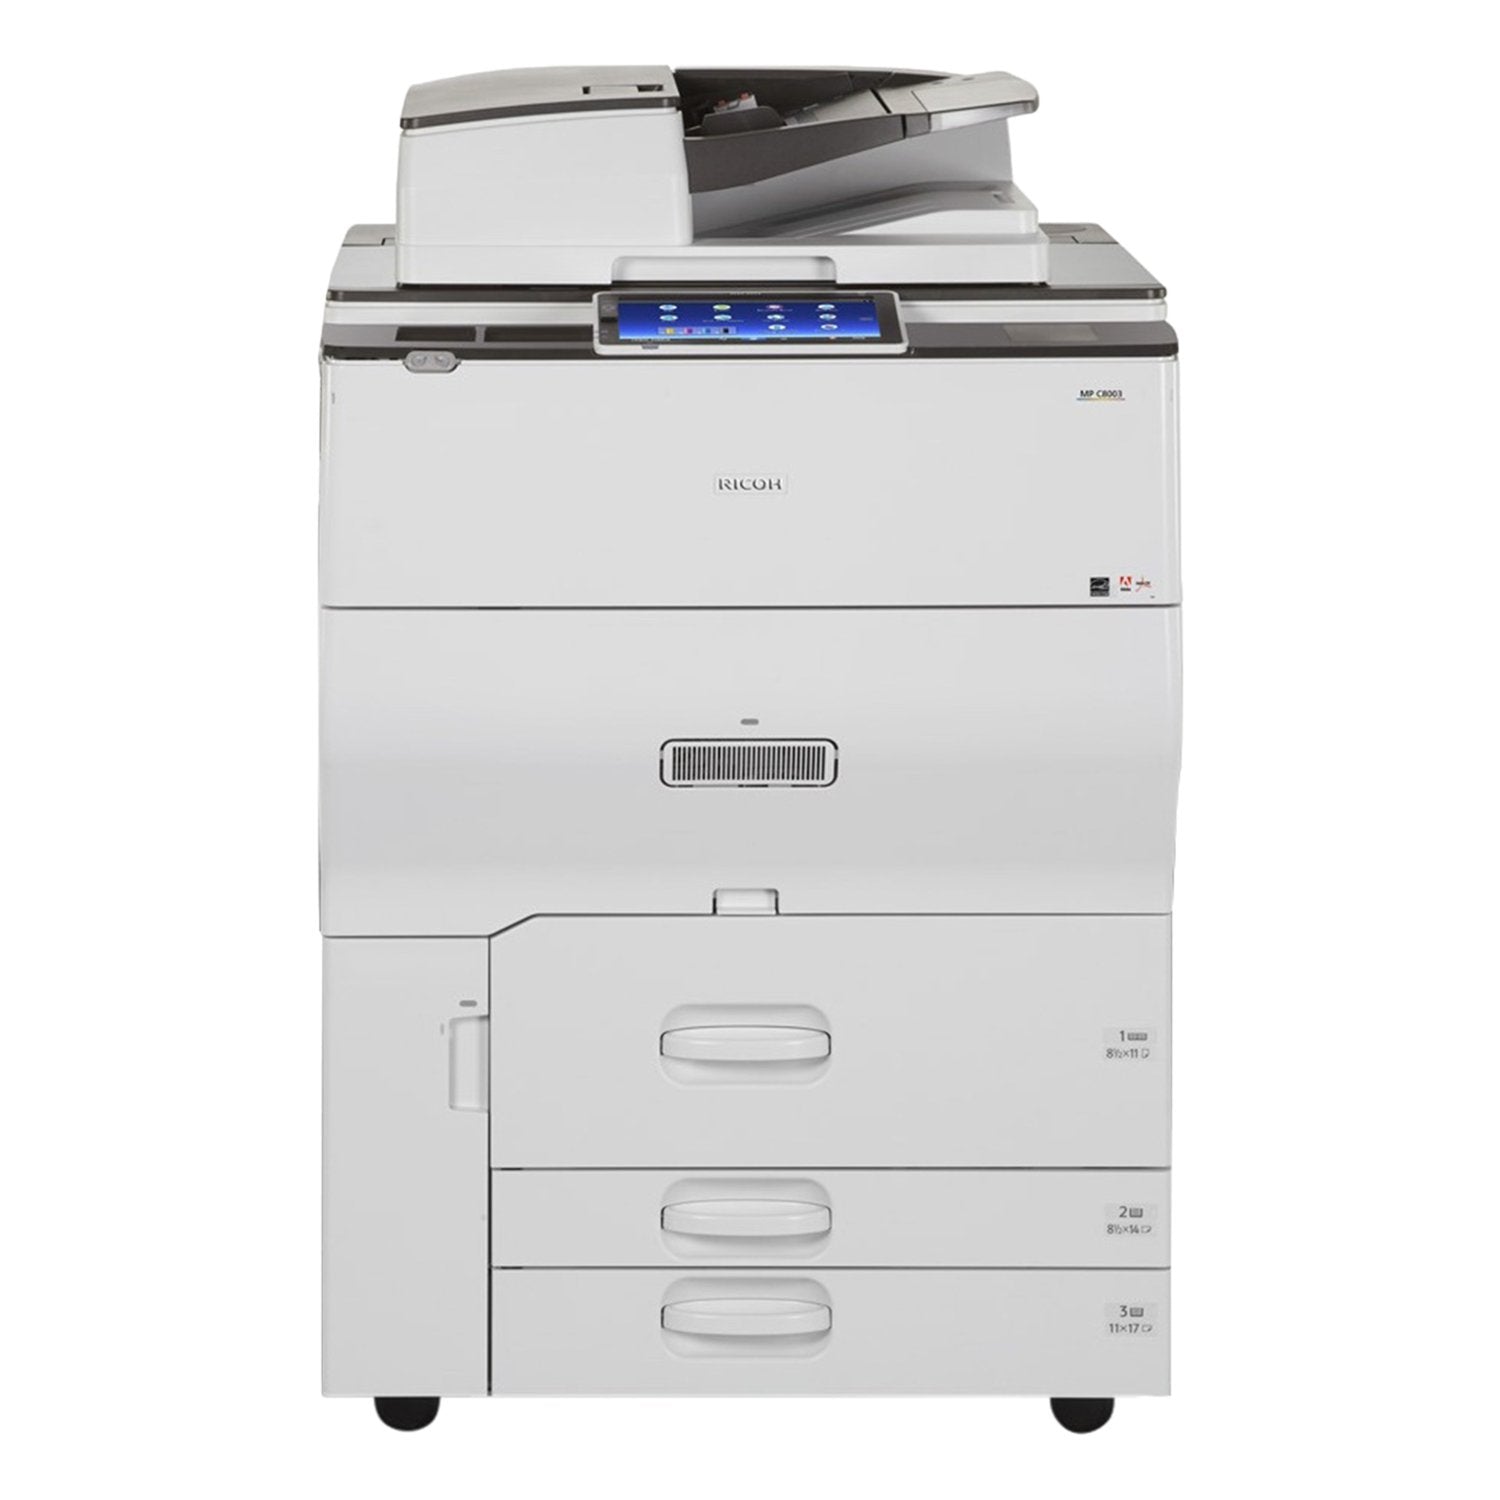 Absolute Toner $125/Month Ricoh MP C8003 Color Laser Multifunction Printer Copy, Scan, Print With Finisher, Prints Upto 80 PPM For Office Use Showroom Color Copiers